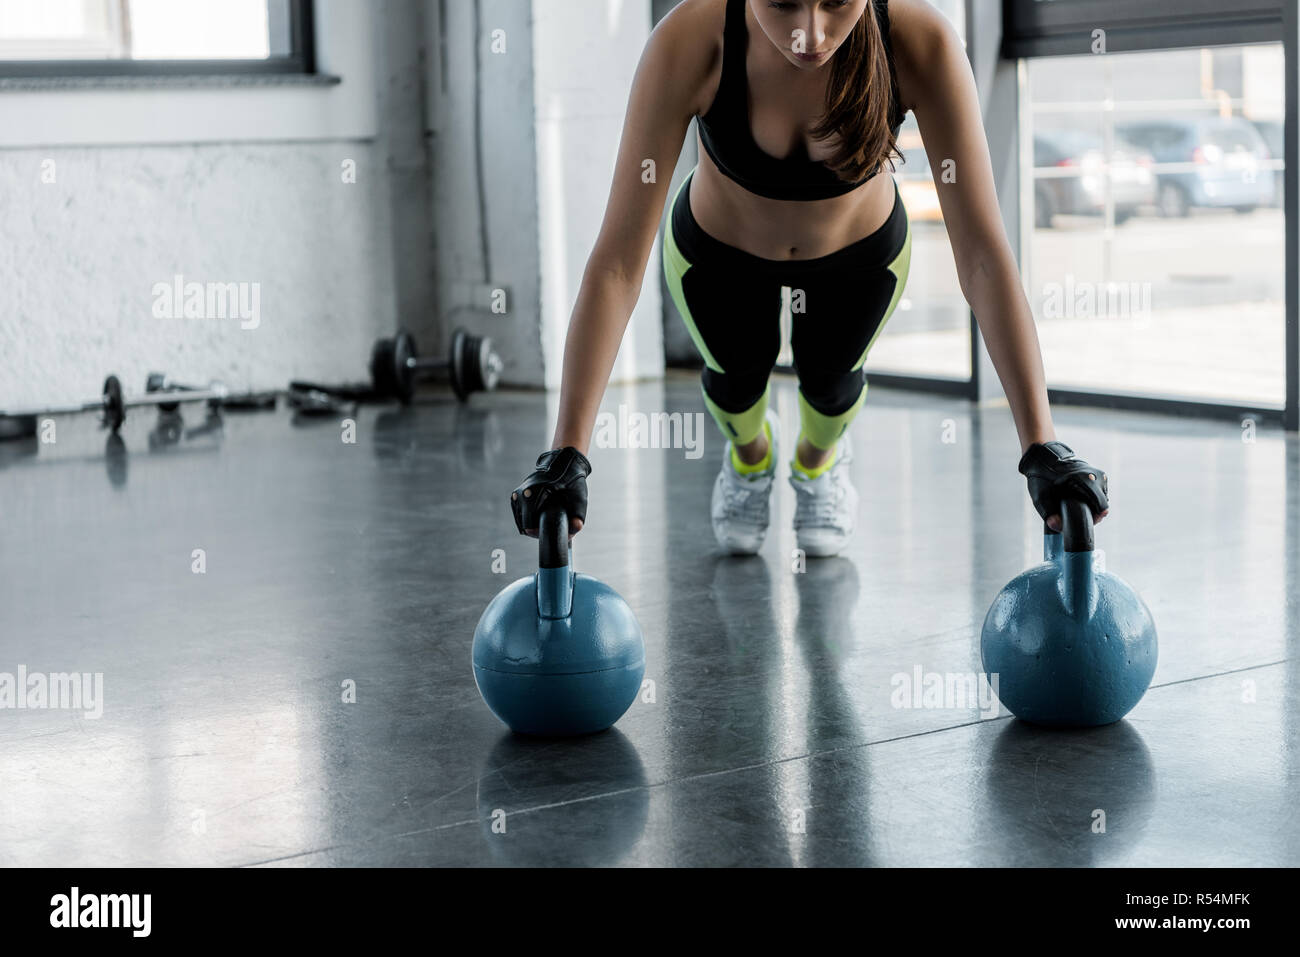 determined sportswoman in weightlifting gloves doing plank exercise on kettlebells at sports center Stock Photo